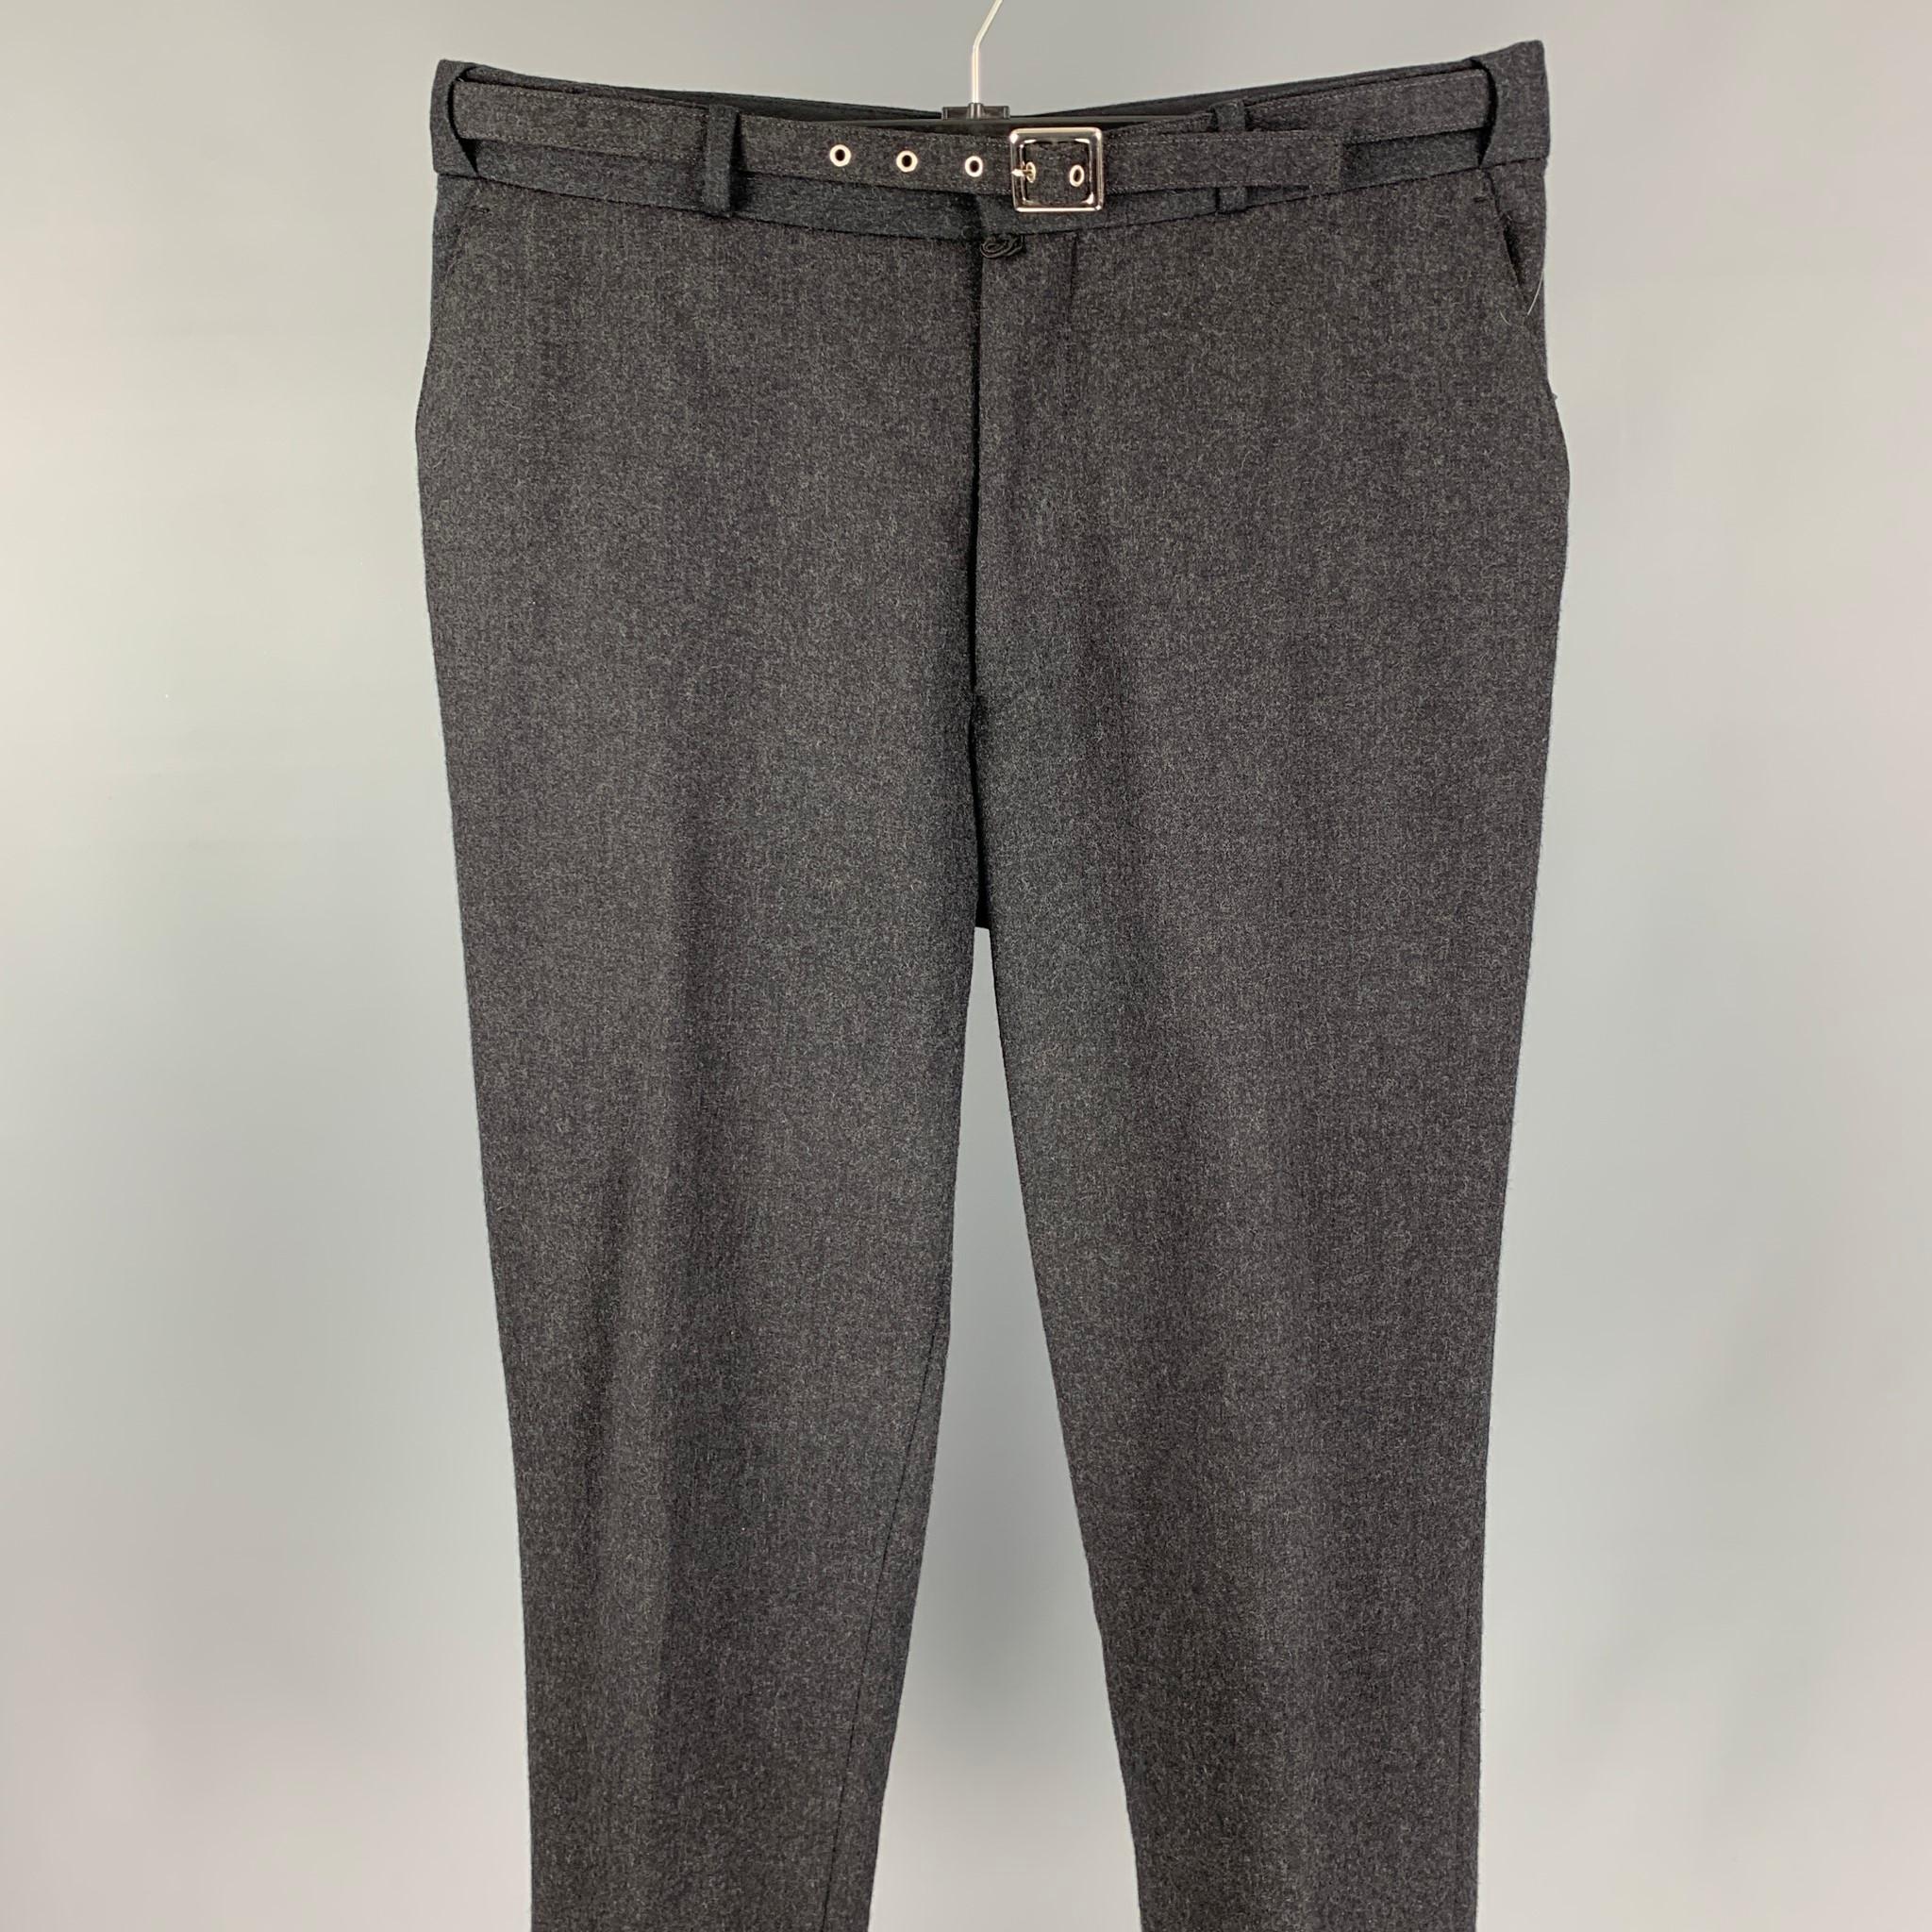 JOHN BARTLETT dress pants comes in a charcoal wool / lycra featuring a self belt detail, flat front, front tab, and a zip fly closure. Made in Italy. 

Very Good Pre-Owned Condition.
Marked: 50

Measurements:

Waist: 32 in.
Rise: 10.5 in.
Inseam: 31